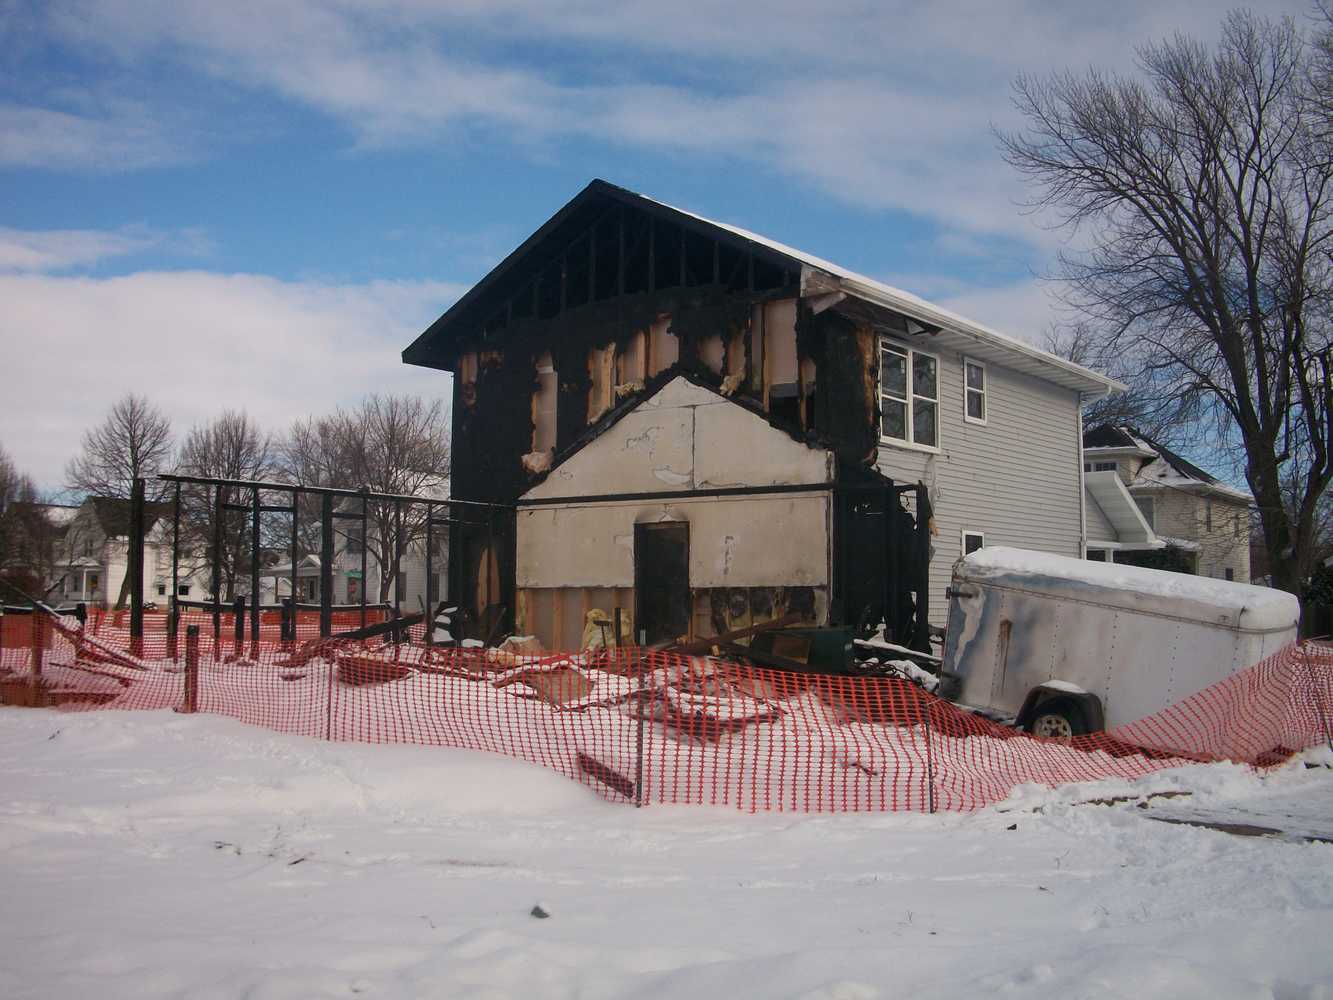 Fire Damage Before & After Photos from Aquire Restoration, Inc.